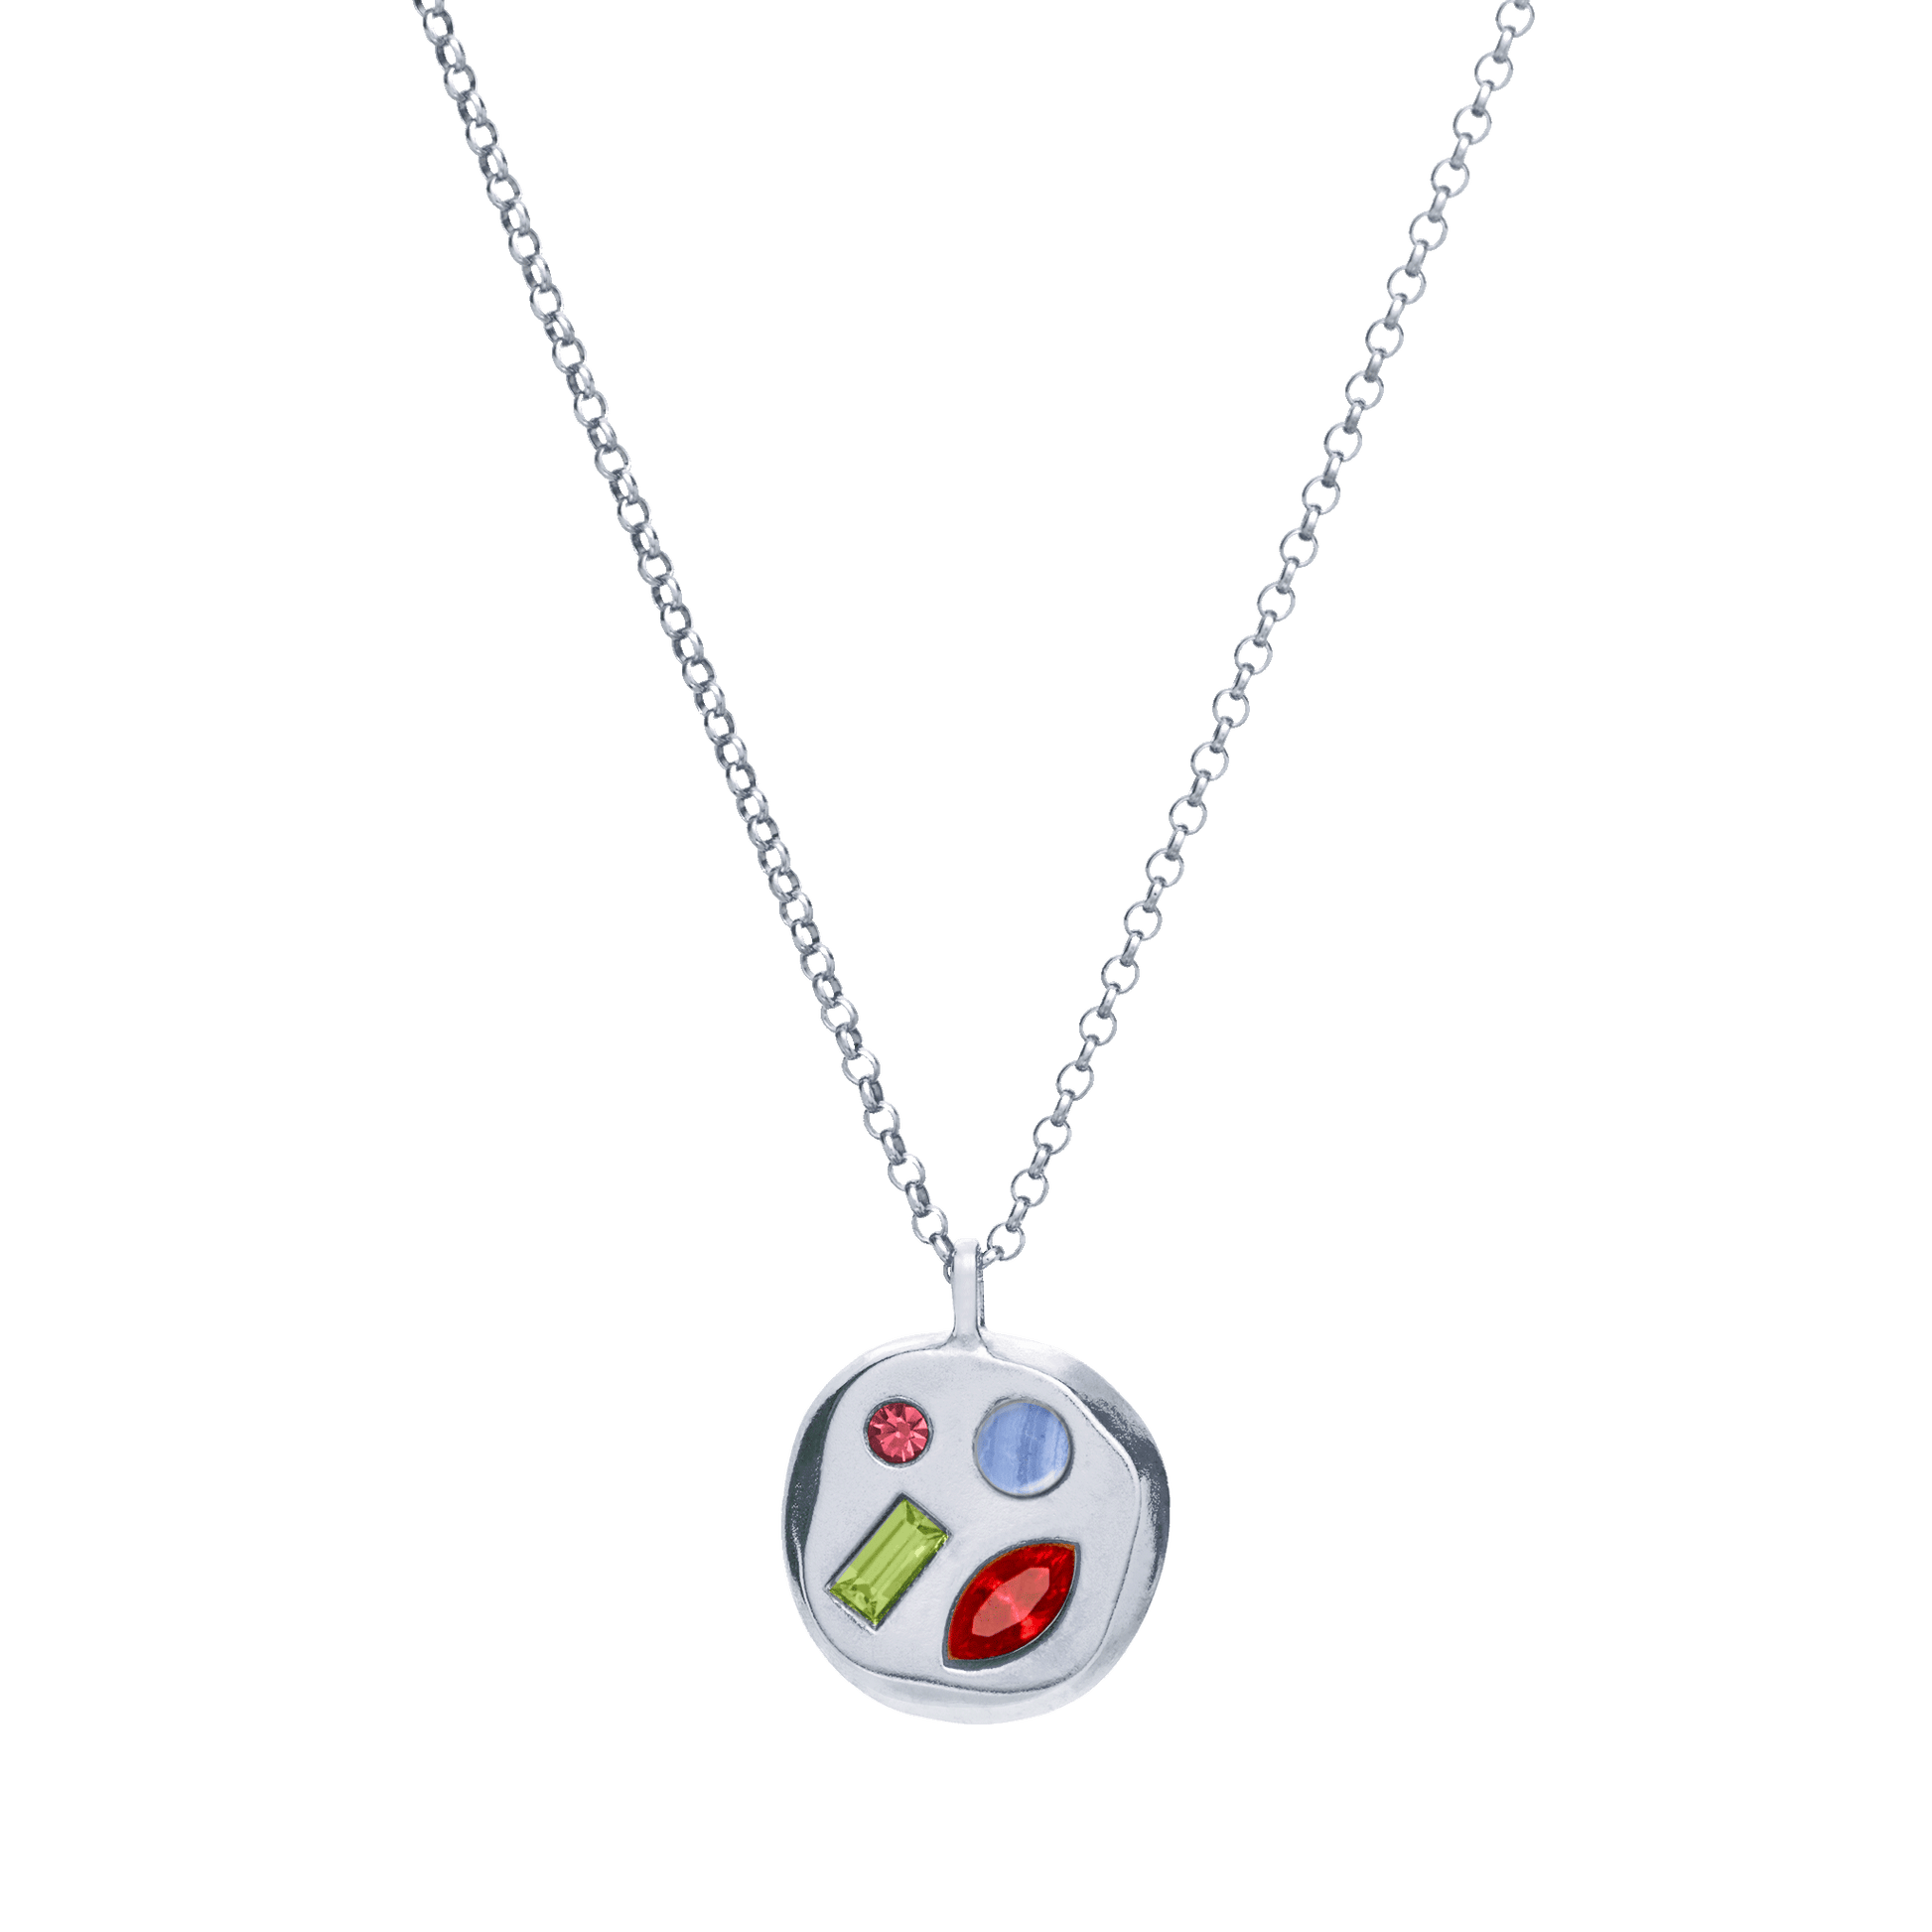 The July Twelfth Pendant in Sterling Silver